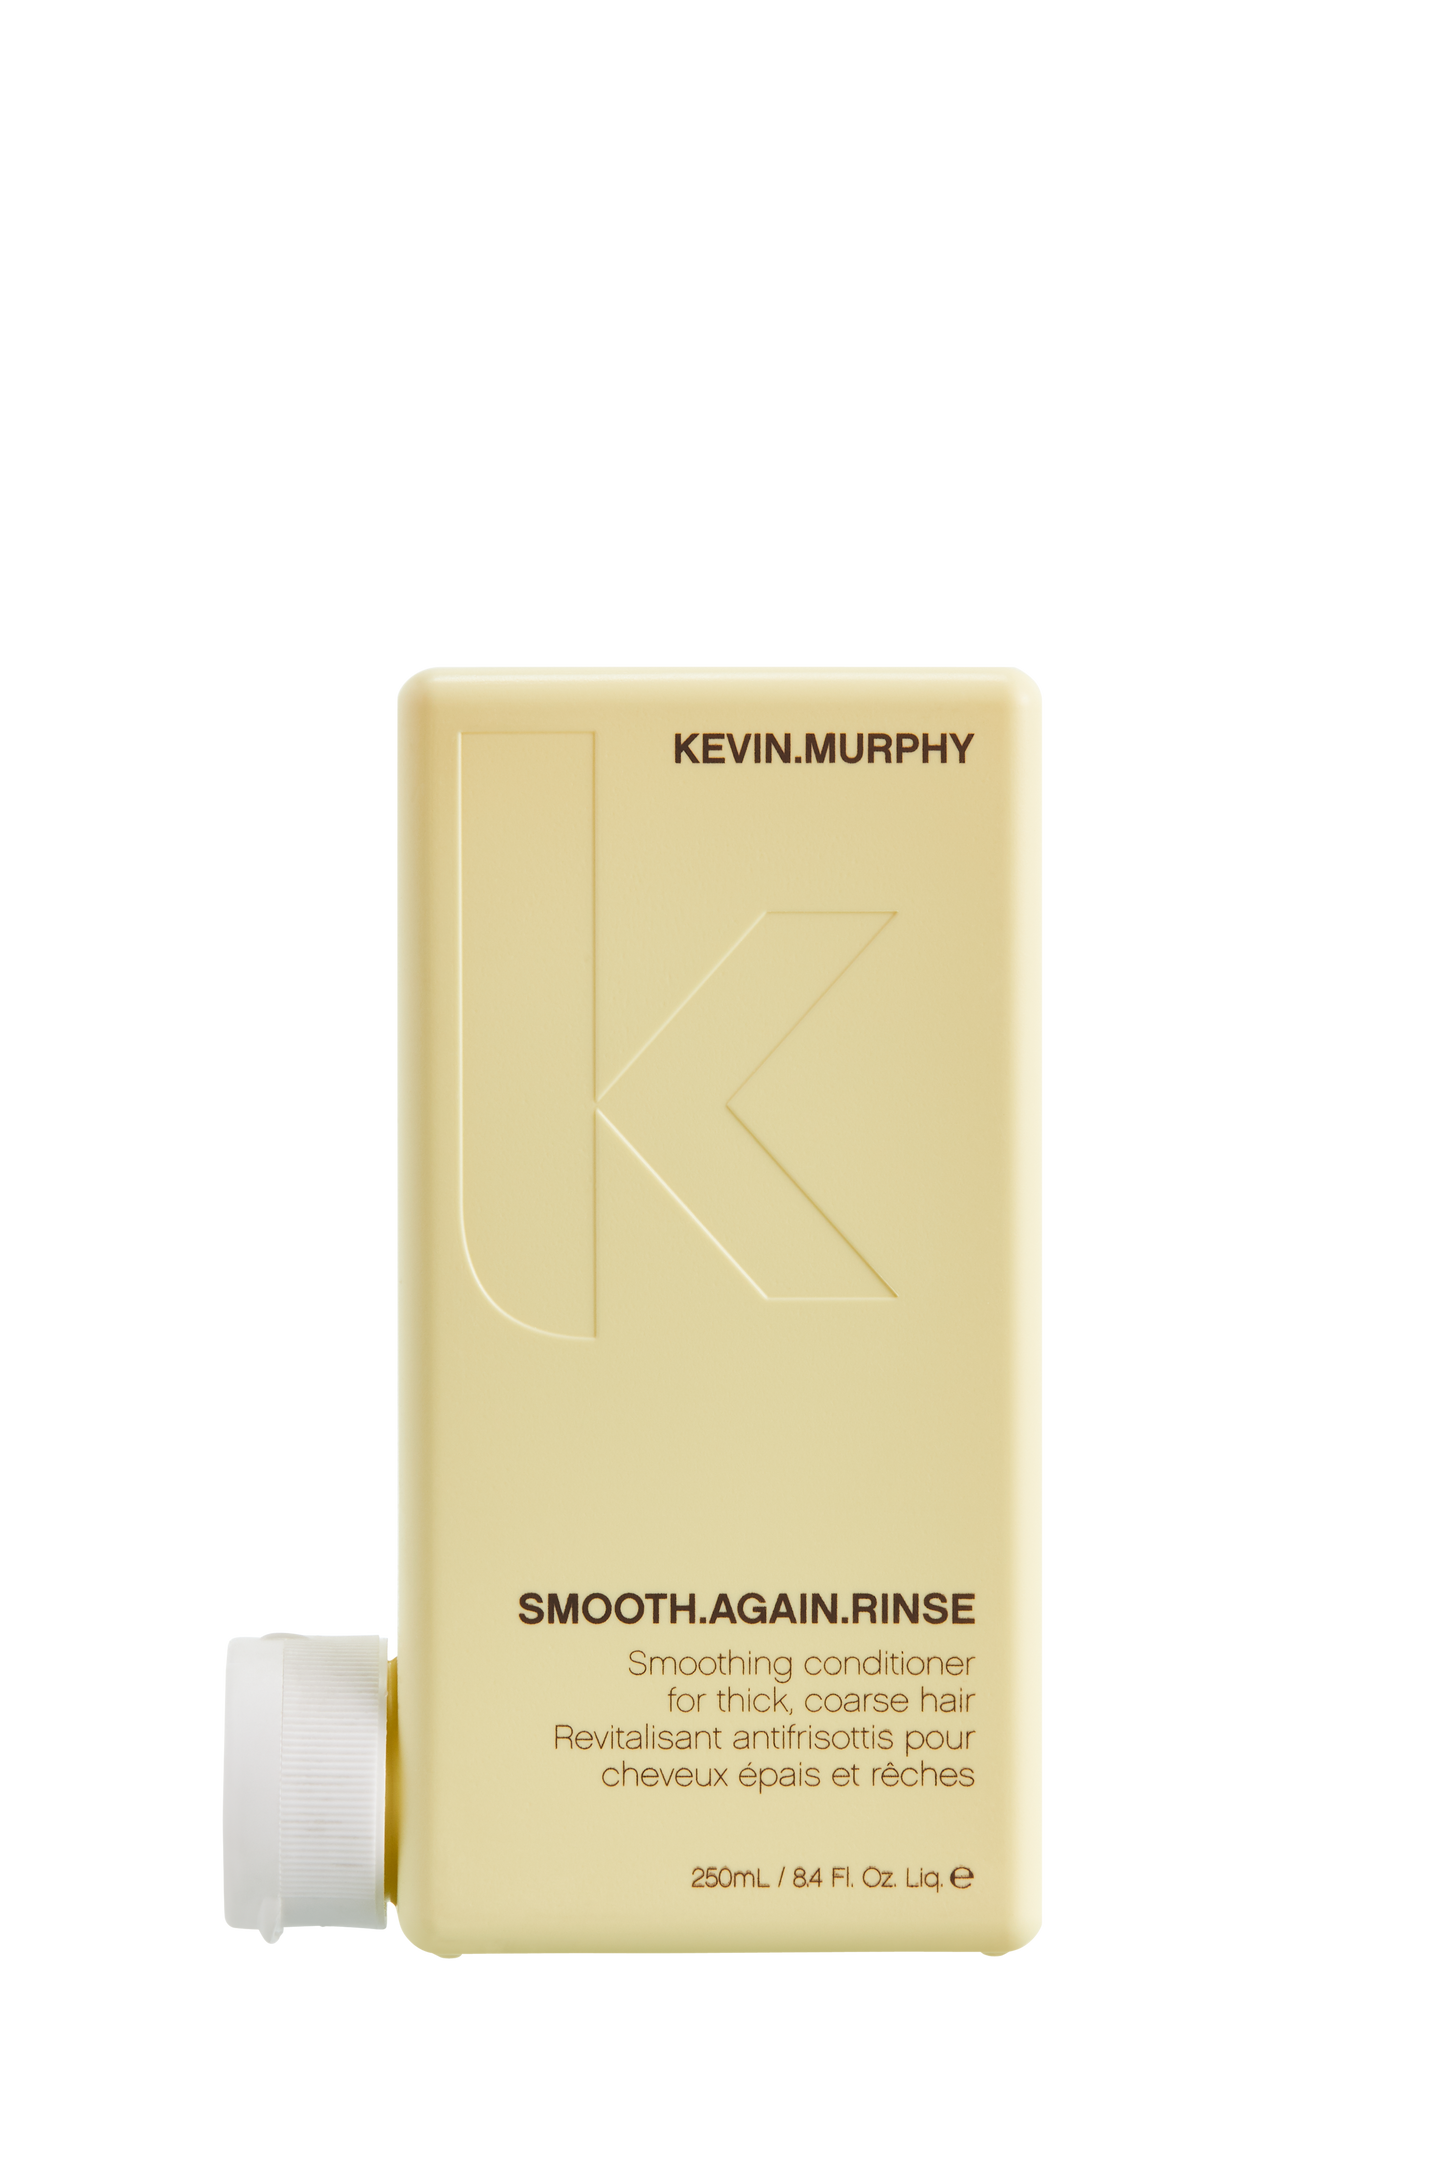 Smooth Again Rinse Kevin murphy